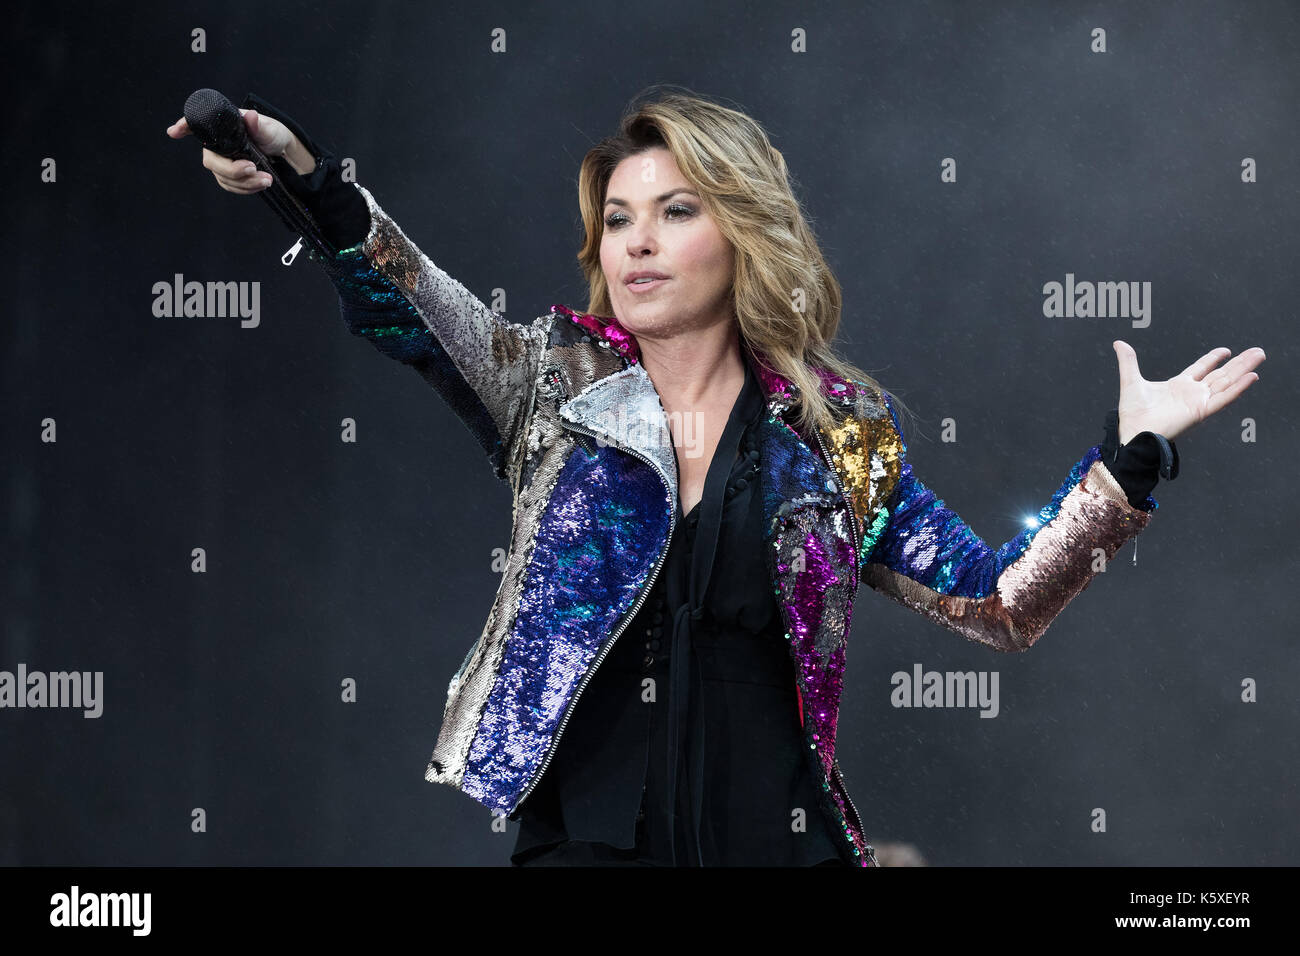 London, England. 9th September 2017, Singer Shania Twain performs for the first time in 15 years in the UK During Radio 2 Live in Hyde Park 2017 on September 10, 2017, London.  England.© Jason Richardson / Alamy Live News Stock Photo